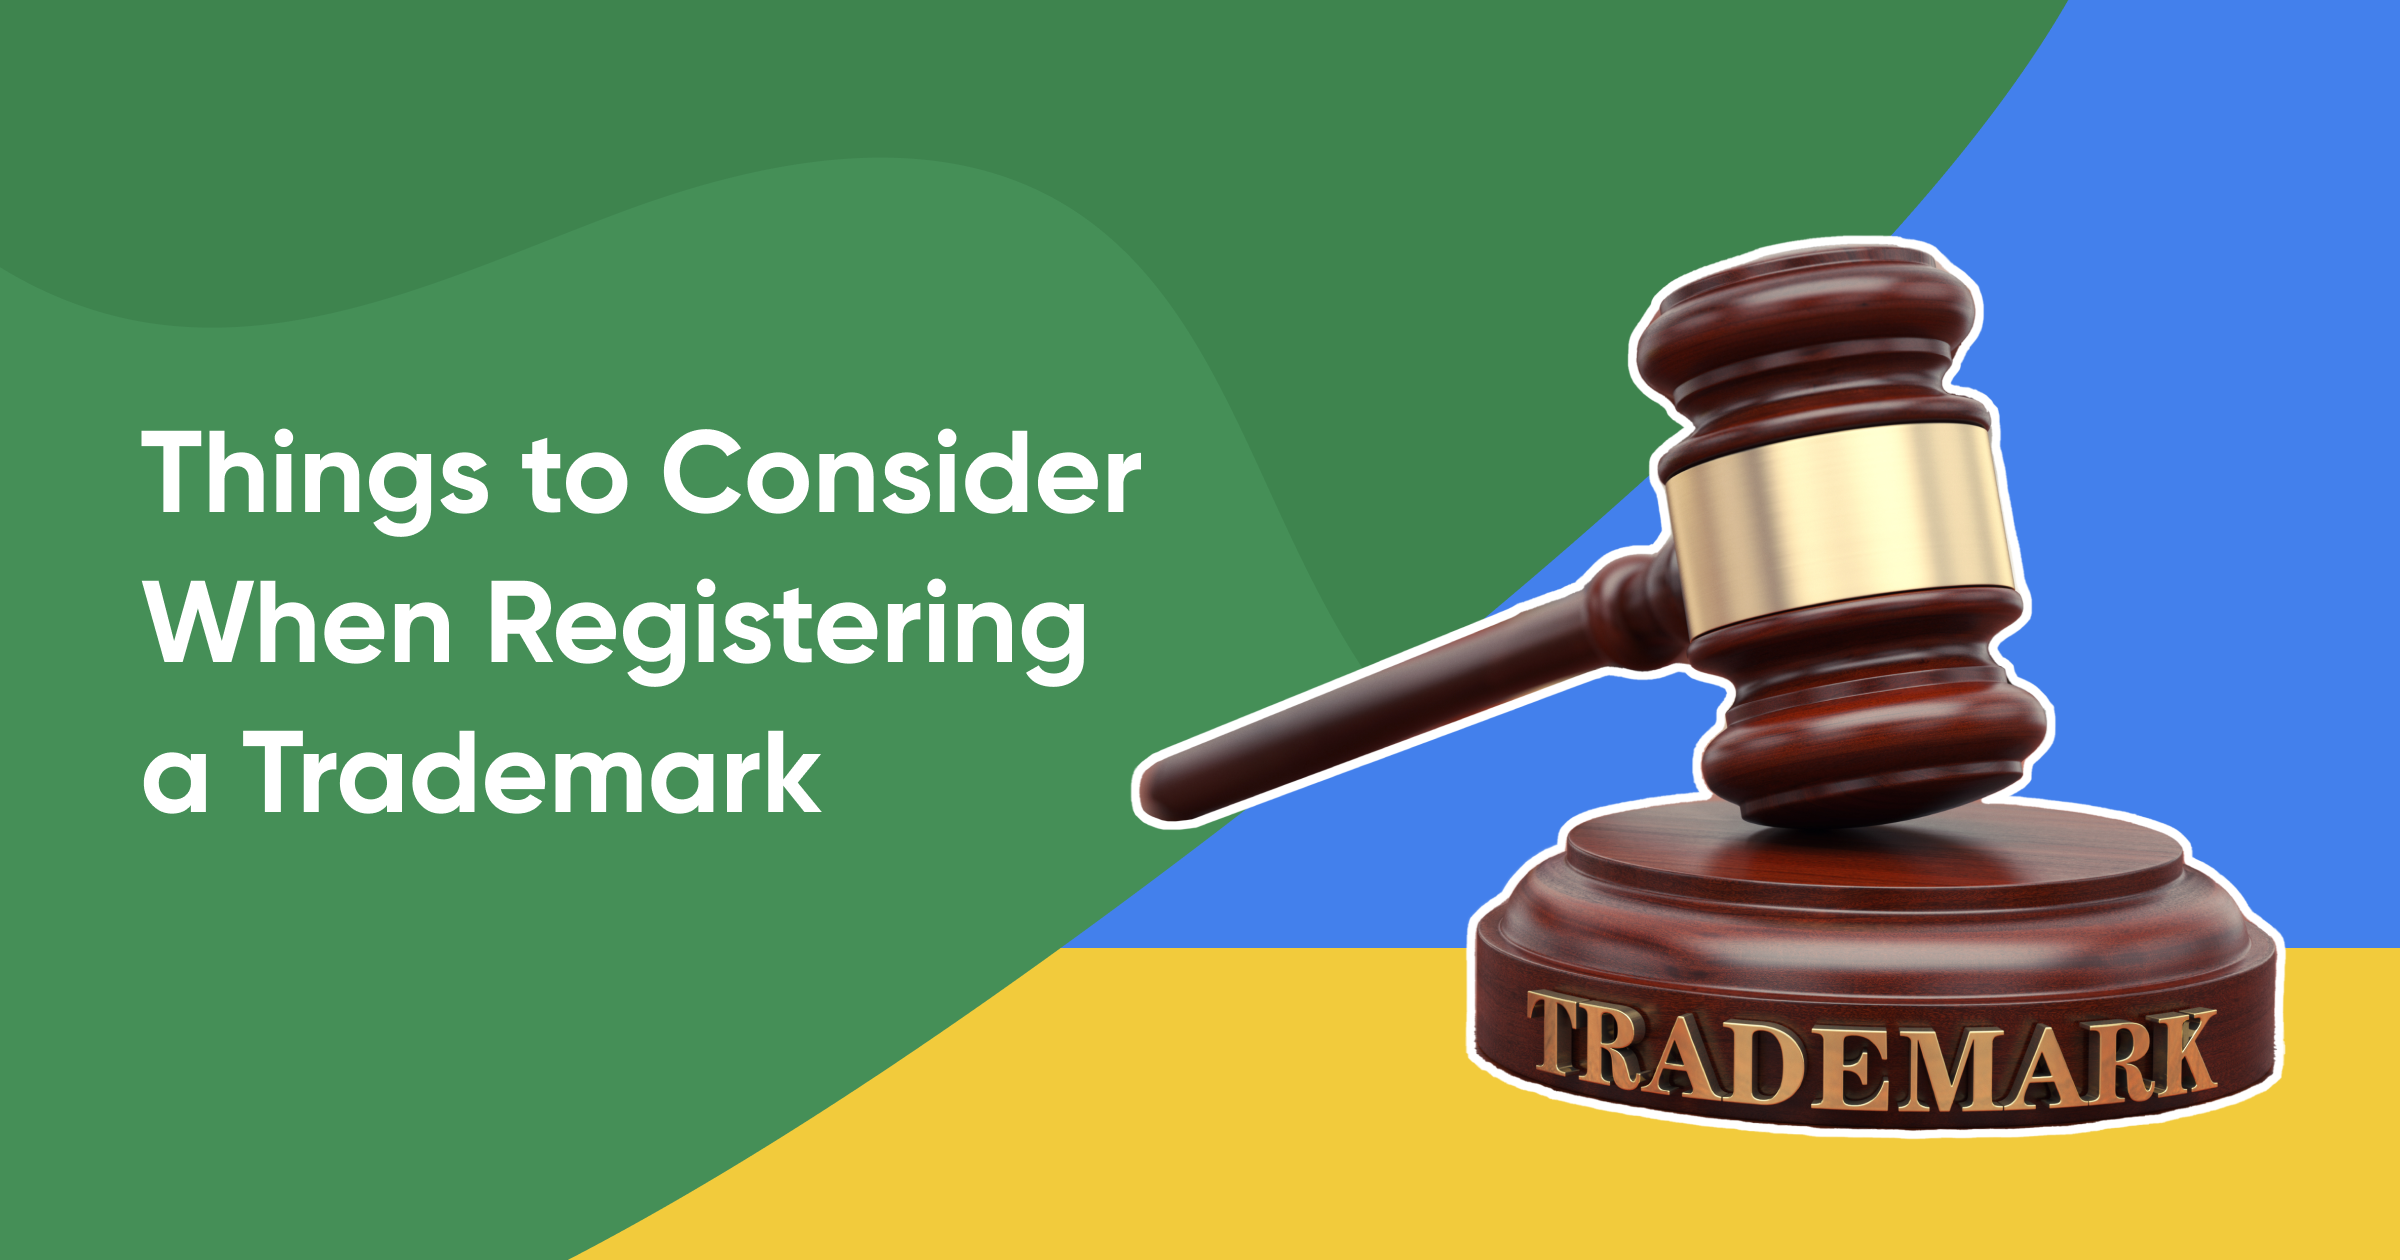 Things to Consider When Registering a Trademark